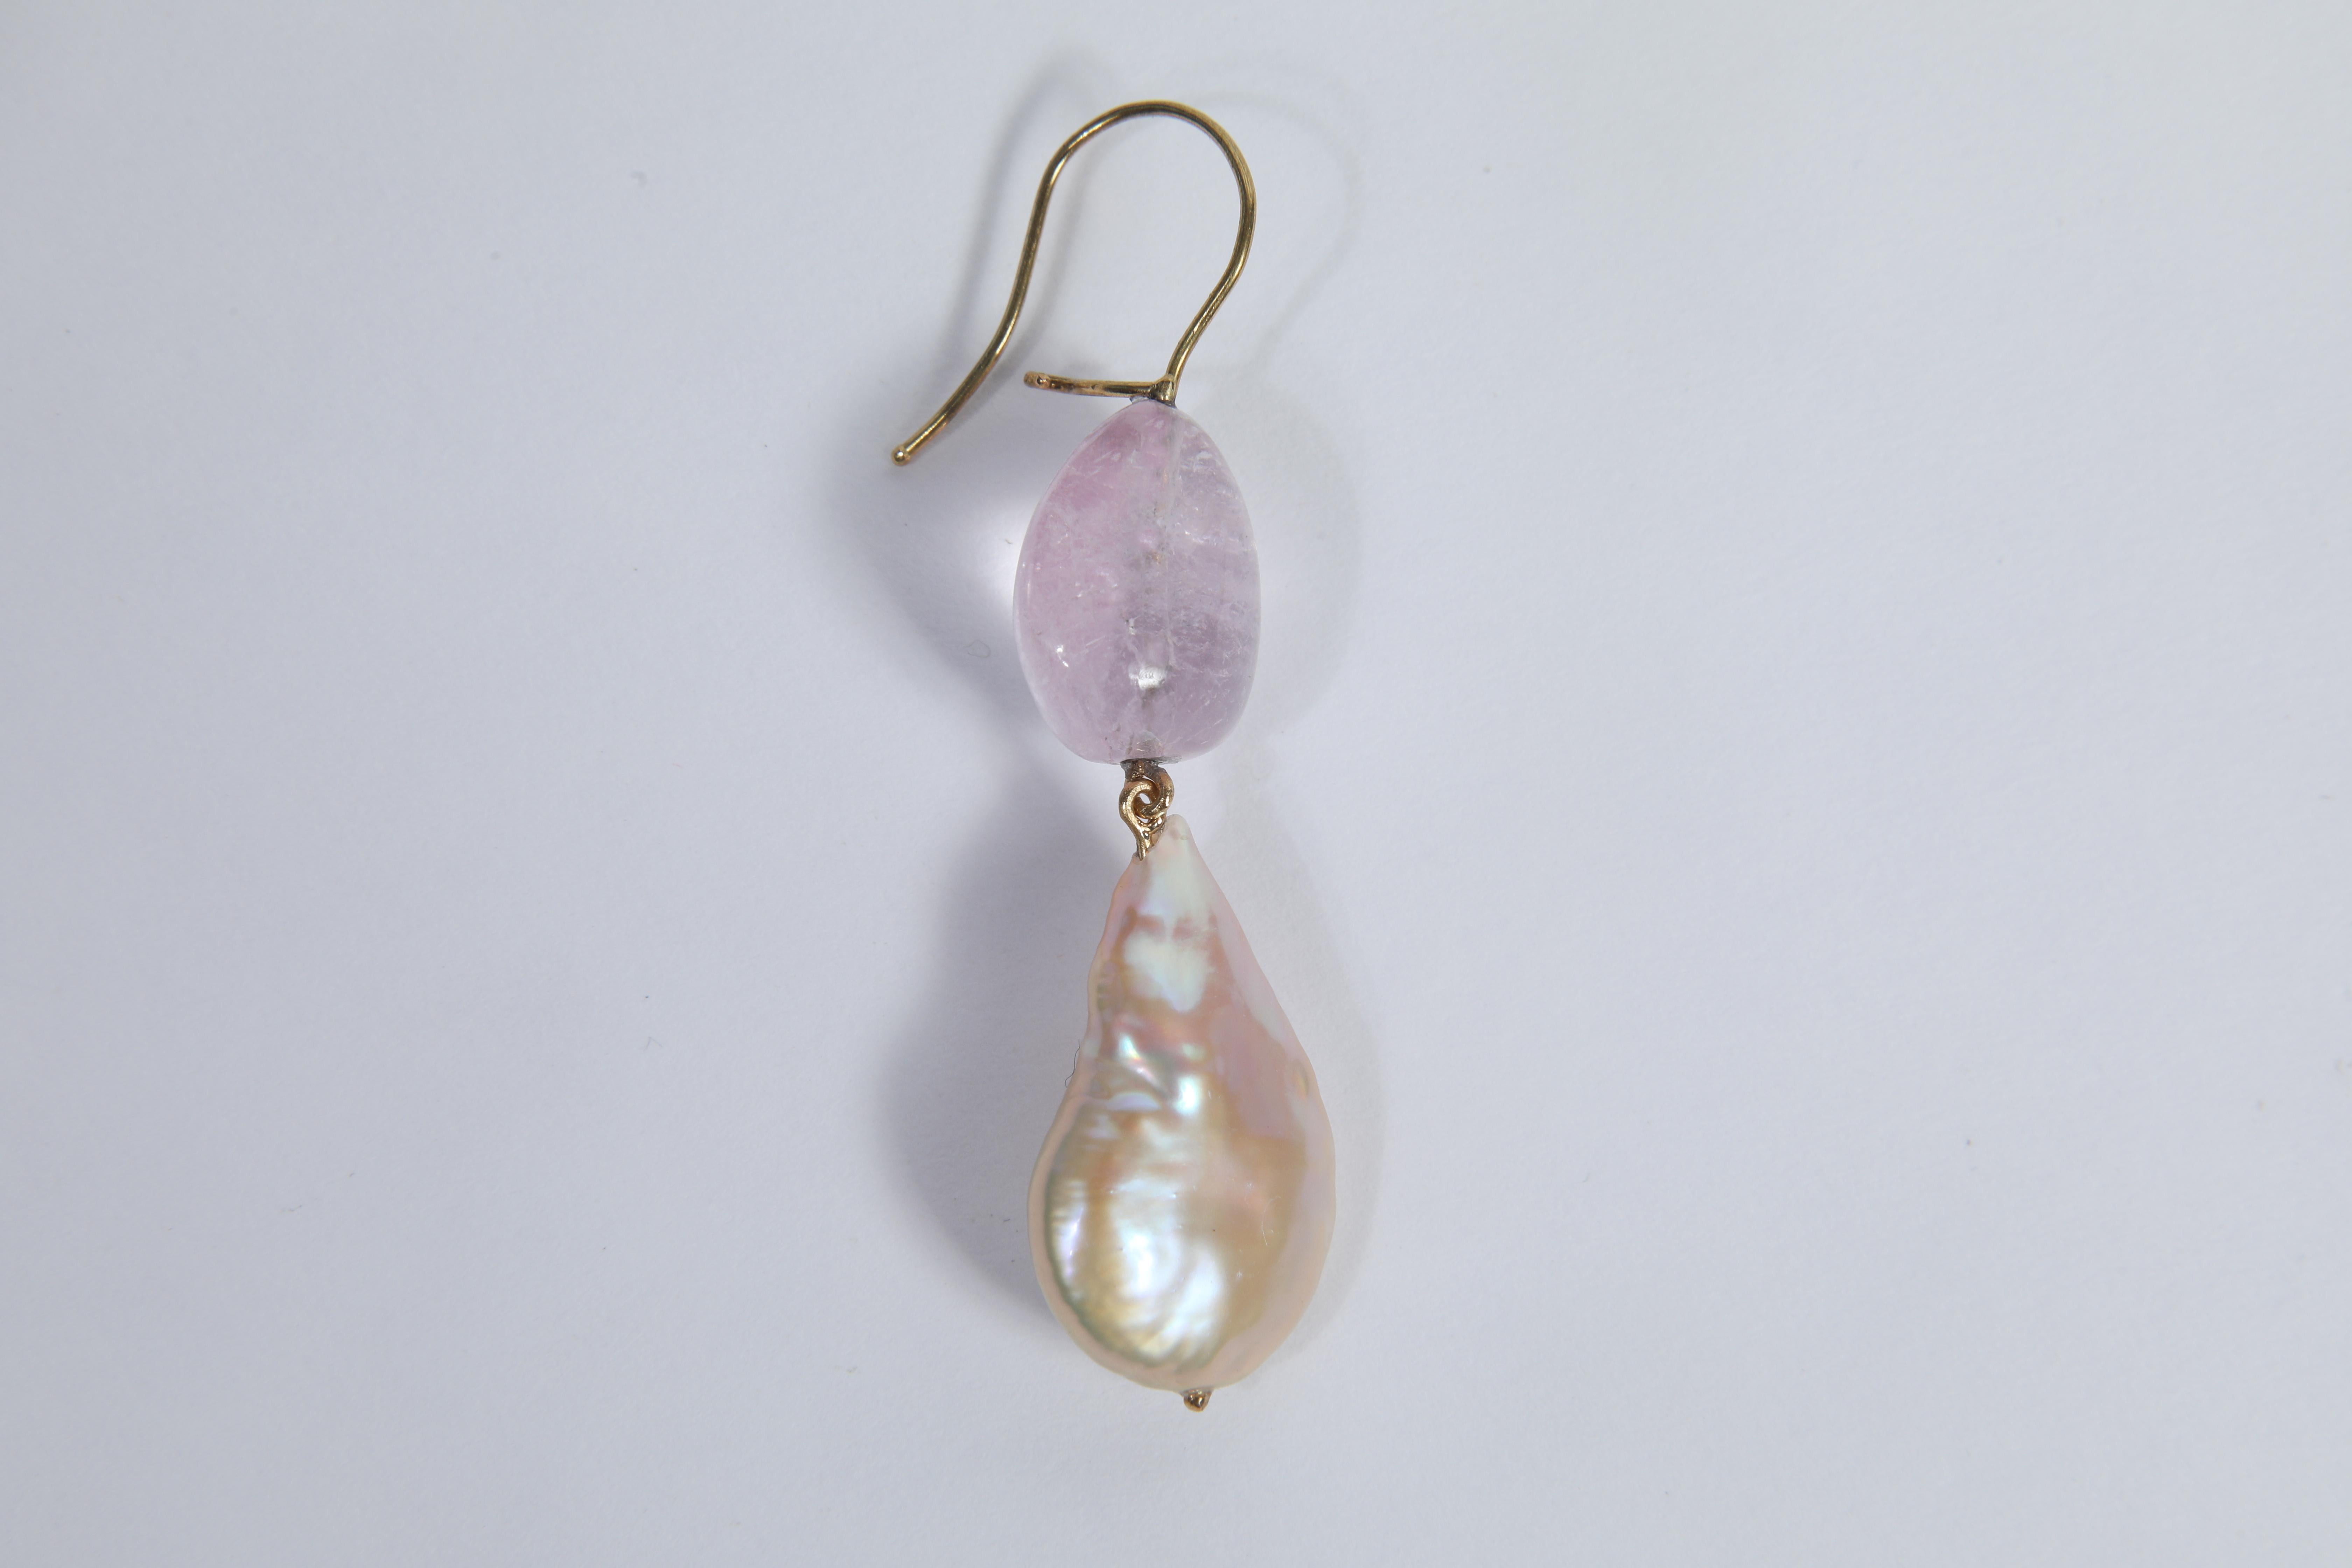 Contemporary Baroque Pearls Earrings Set with Pink Beryls Tumbles by Marion Jeantet